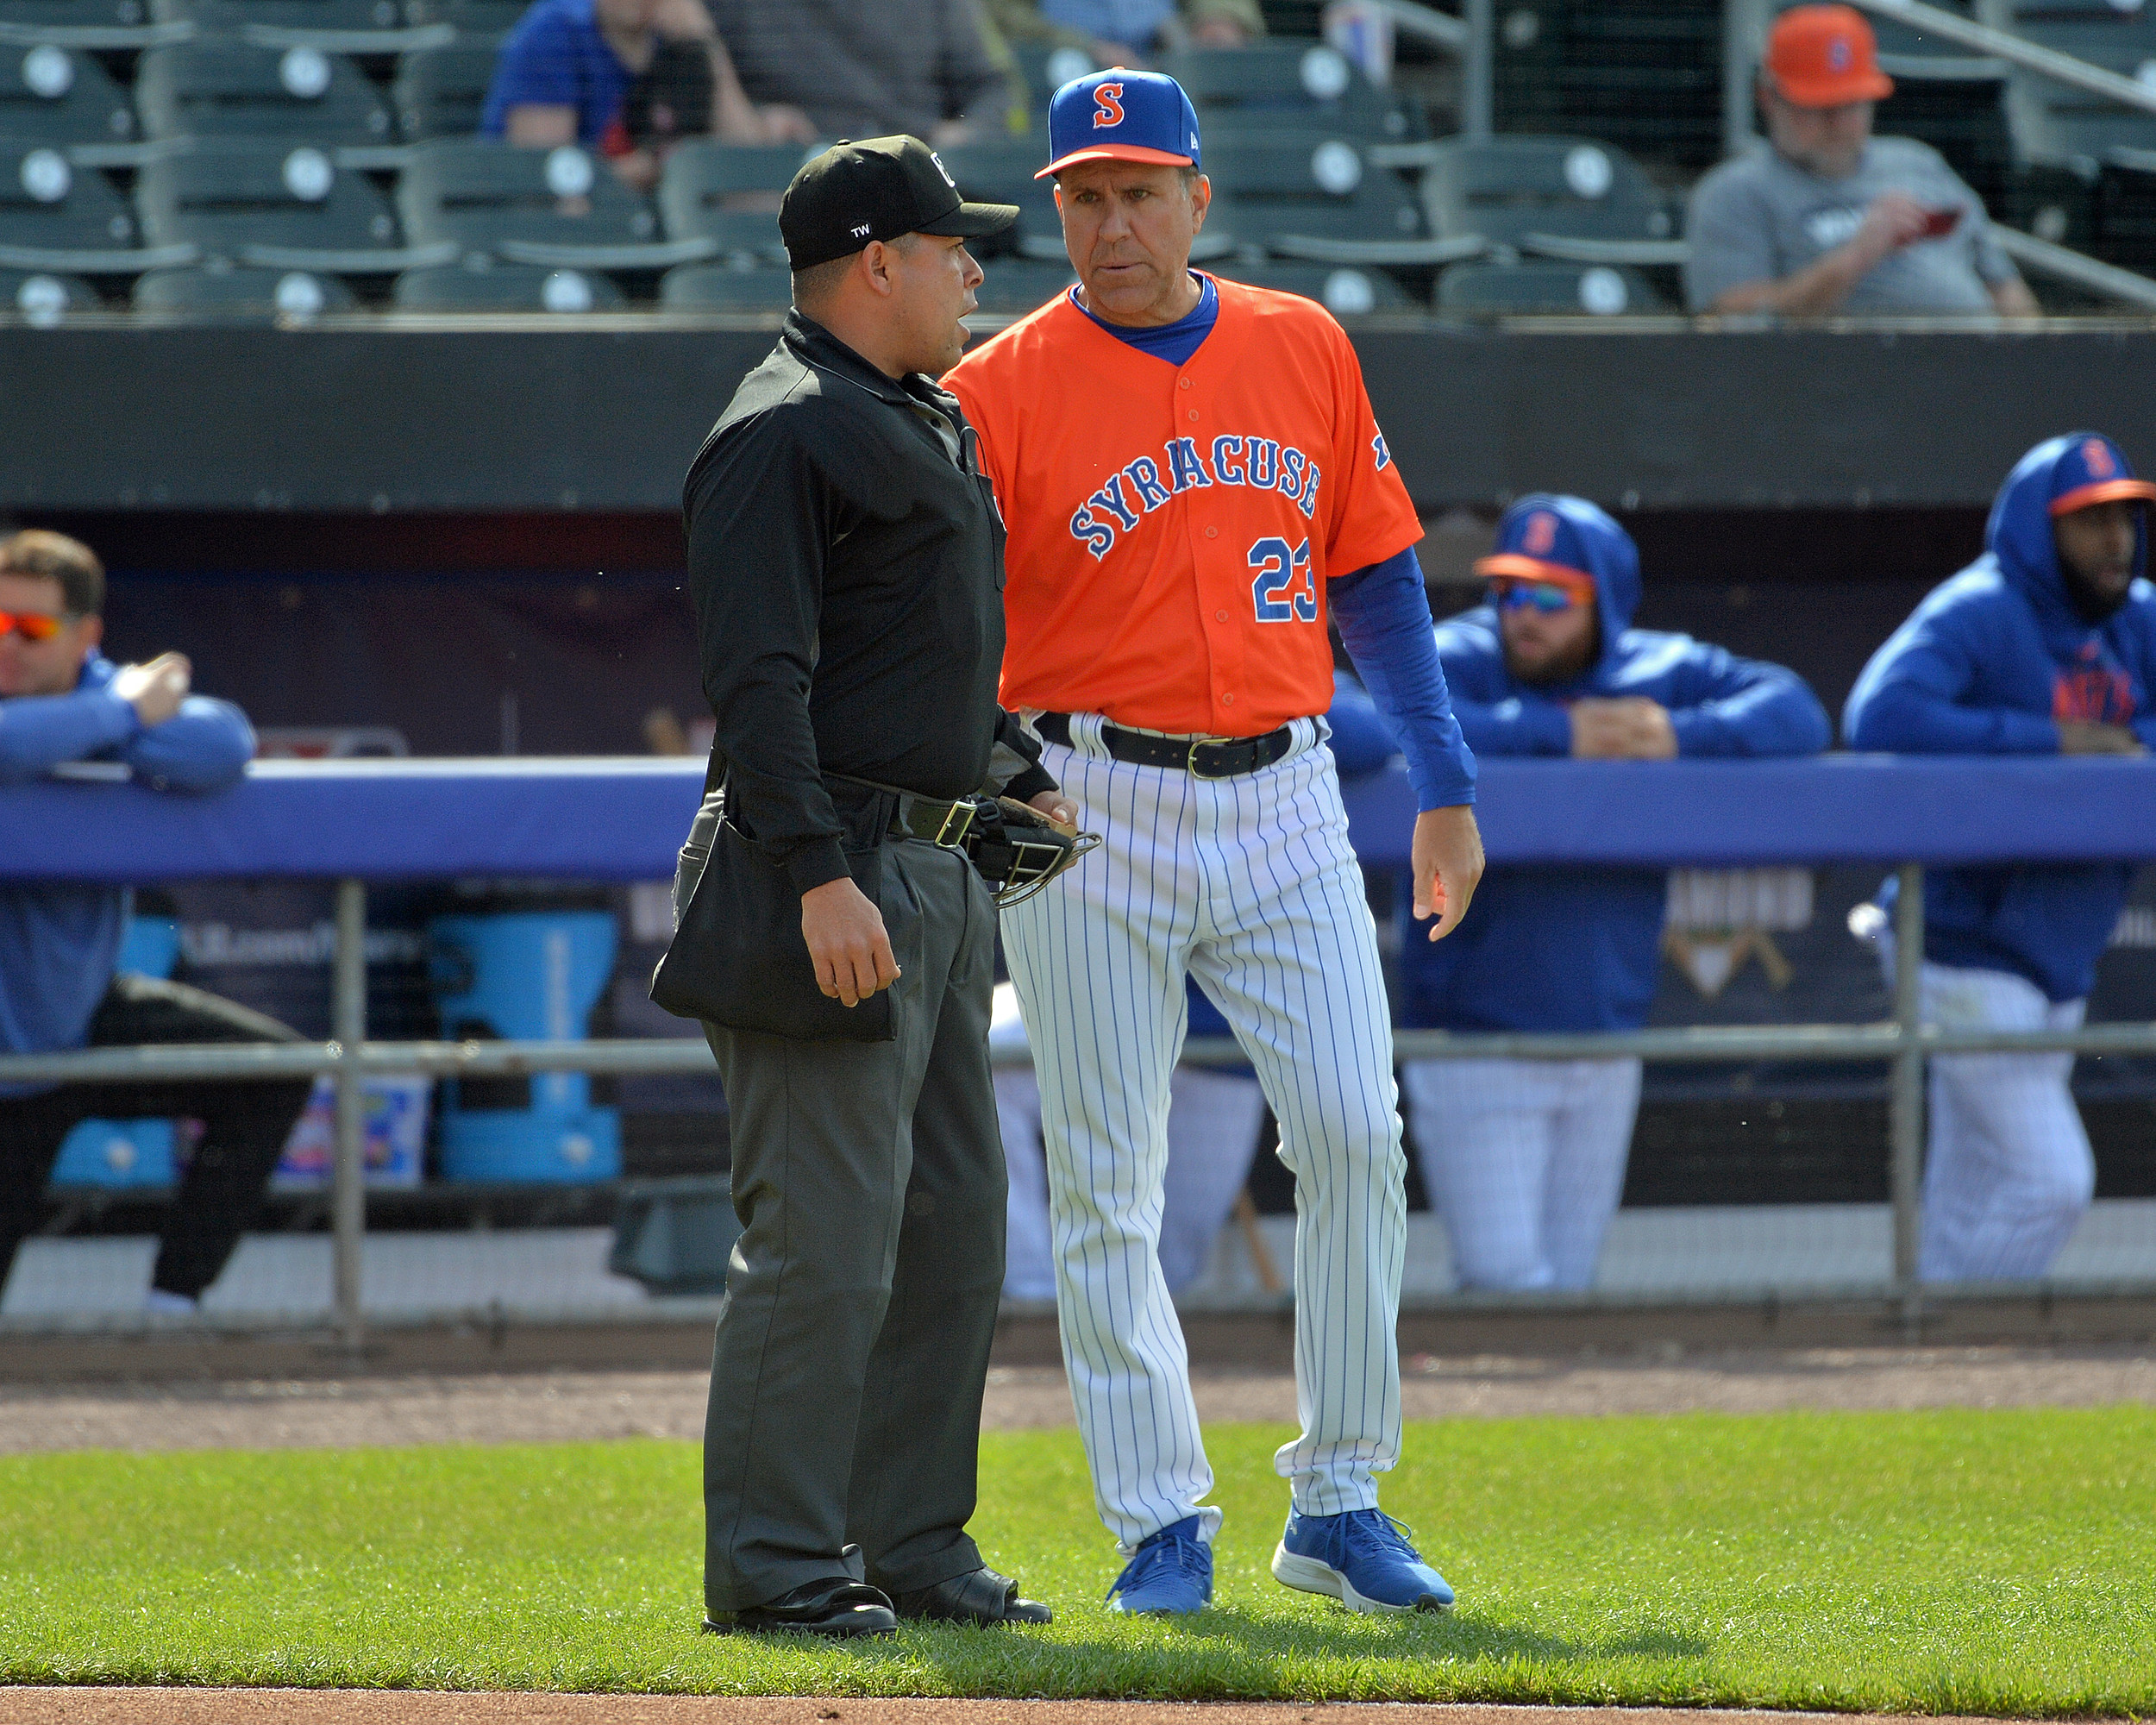 LIVE: Baseball is back! The Syracuse Mets have their home opener